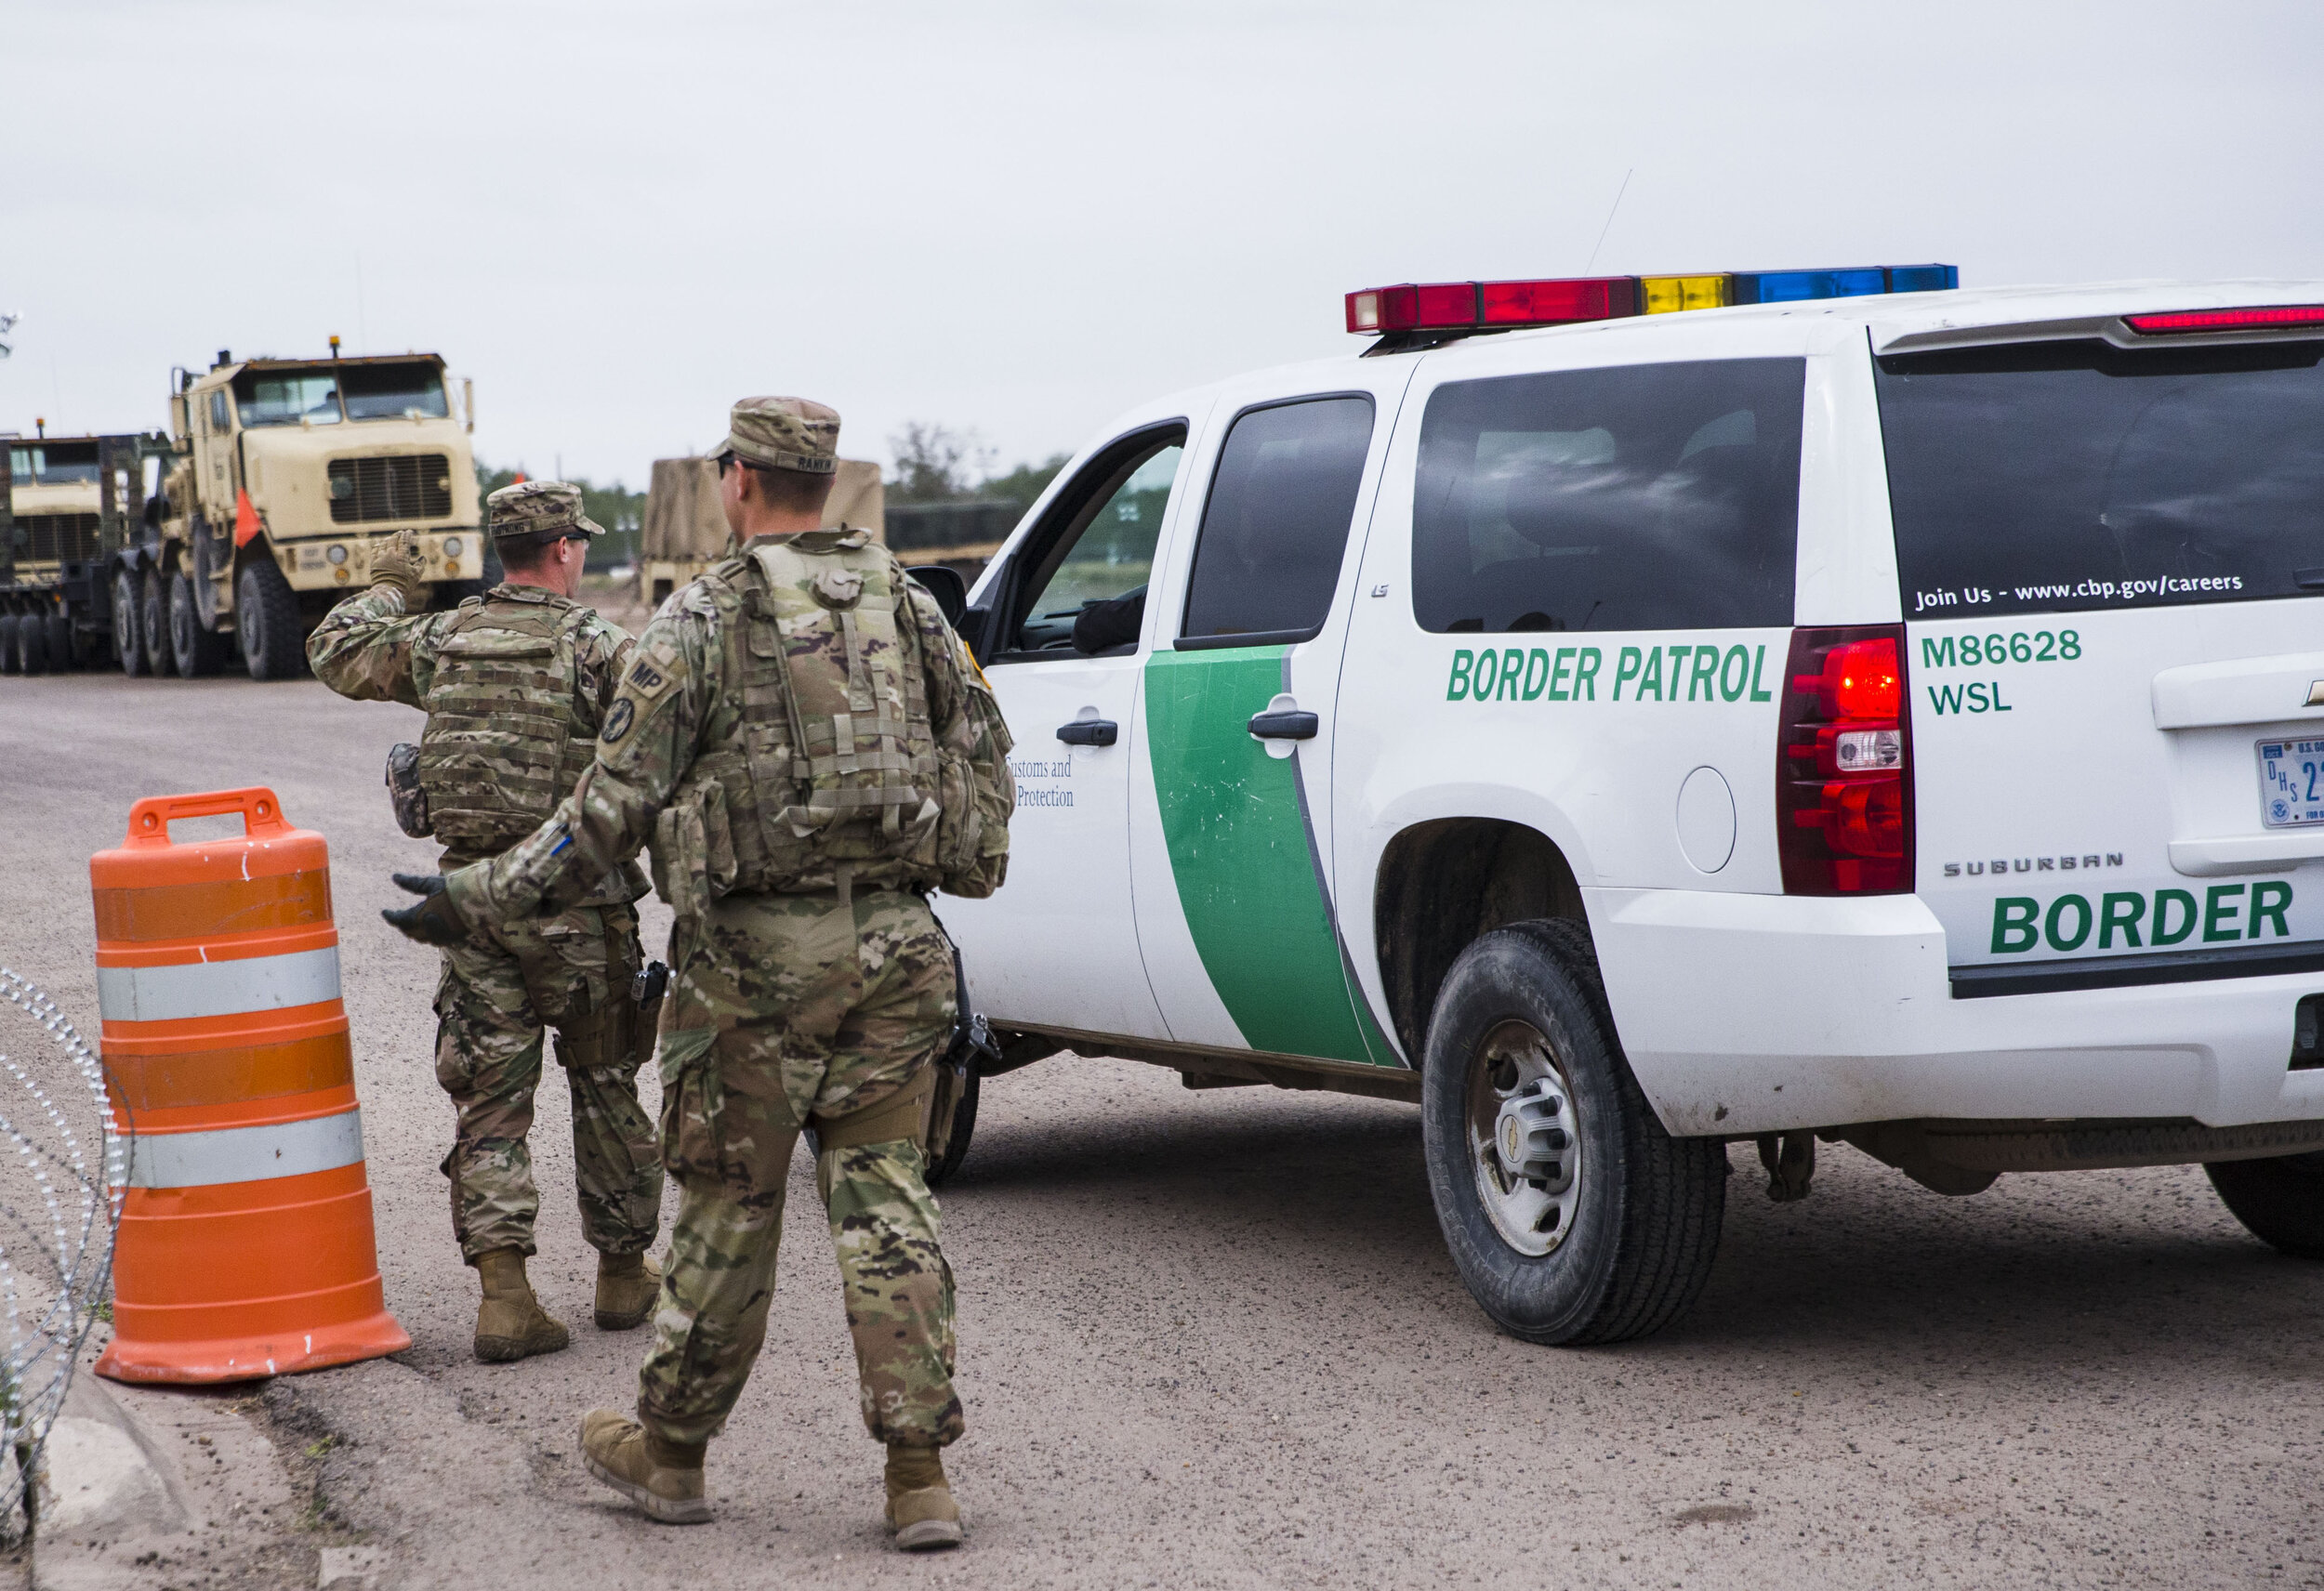  U.S. Army troops deployed to the U.S.-Mexico border in Texas set up a Military camp at the old Craig's Furniture in Weslaco, TX. Army personal open the gate for Border Patrol Agents on Wednesday, Dec. 5, 2018. Defense Secretary James Mattis extended